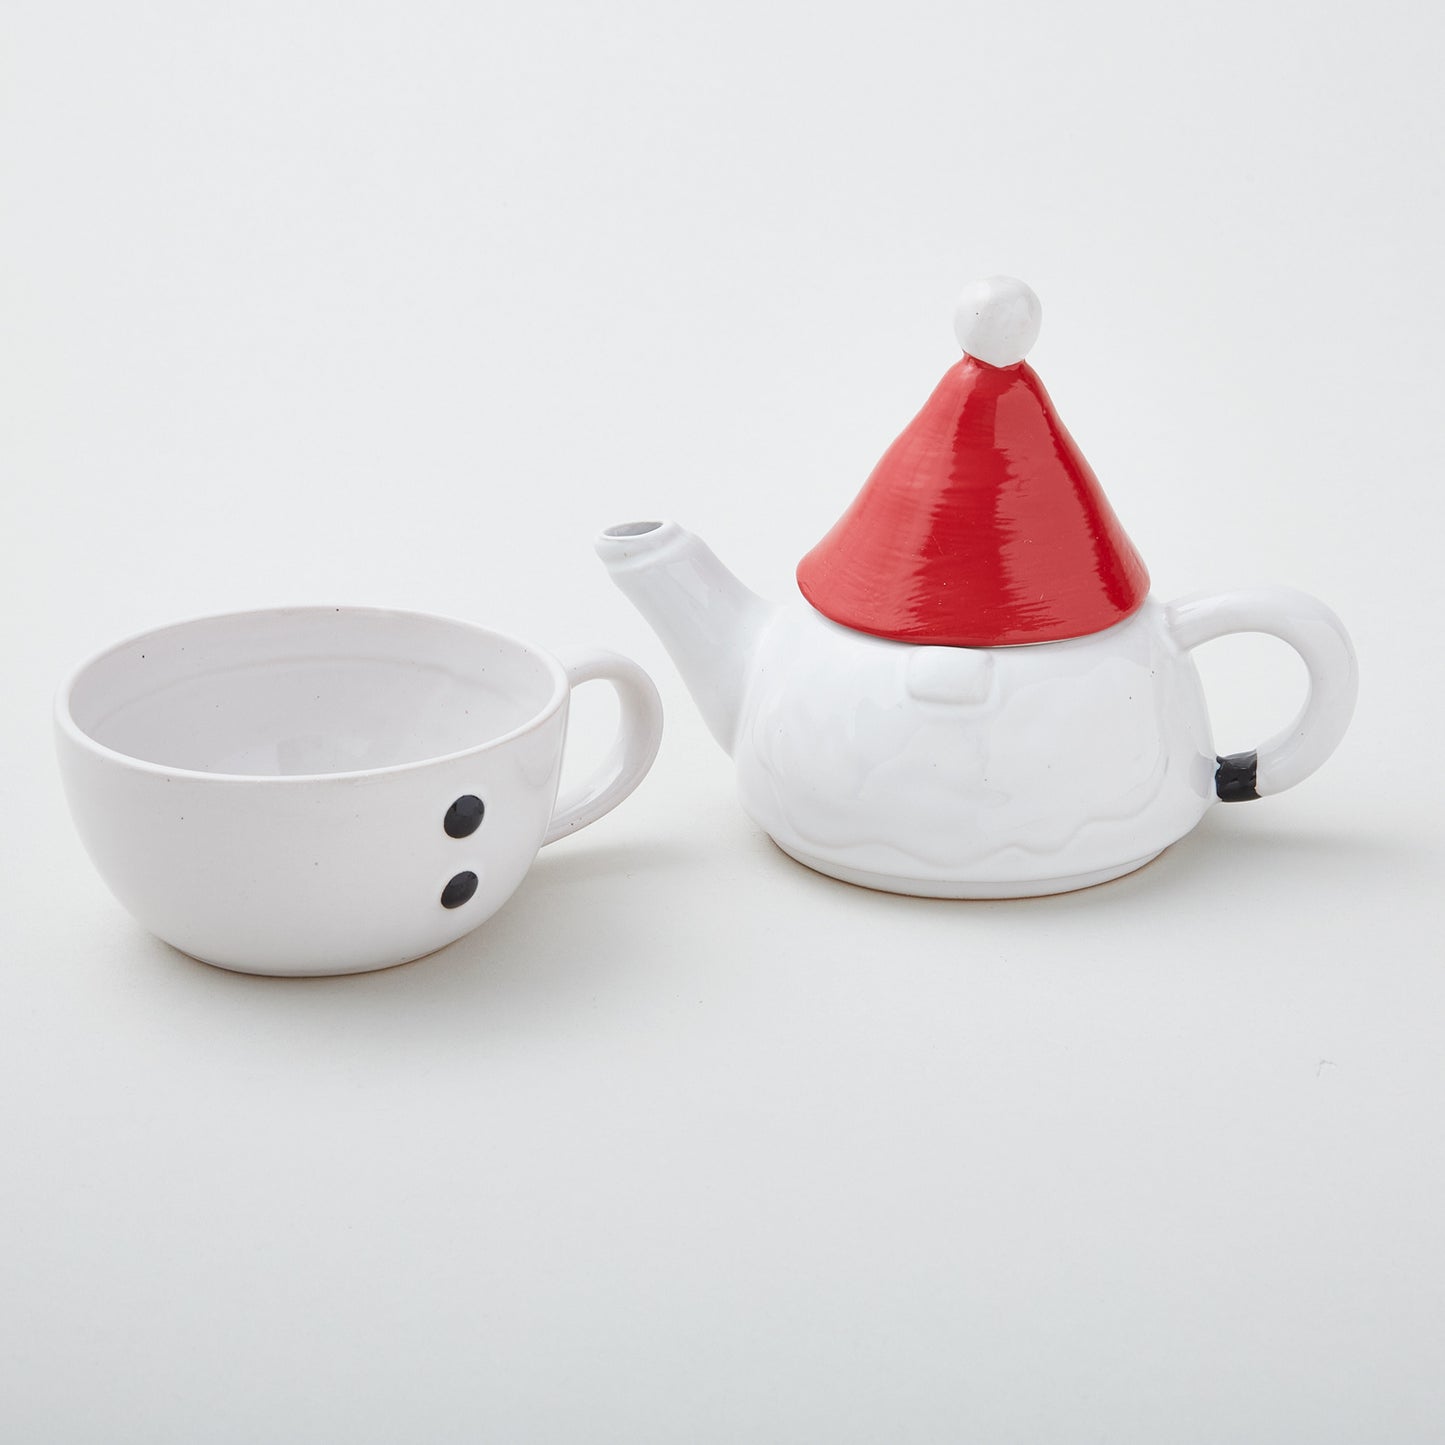 Hand-Painted Stoneware Gnome Tea-for-One Set - FOR WEBSITE AND HOLIDAY STORE Alternative View #1